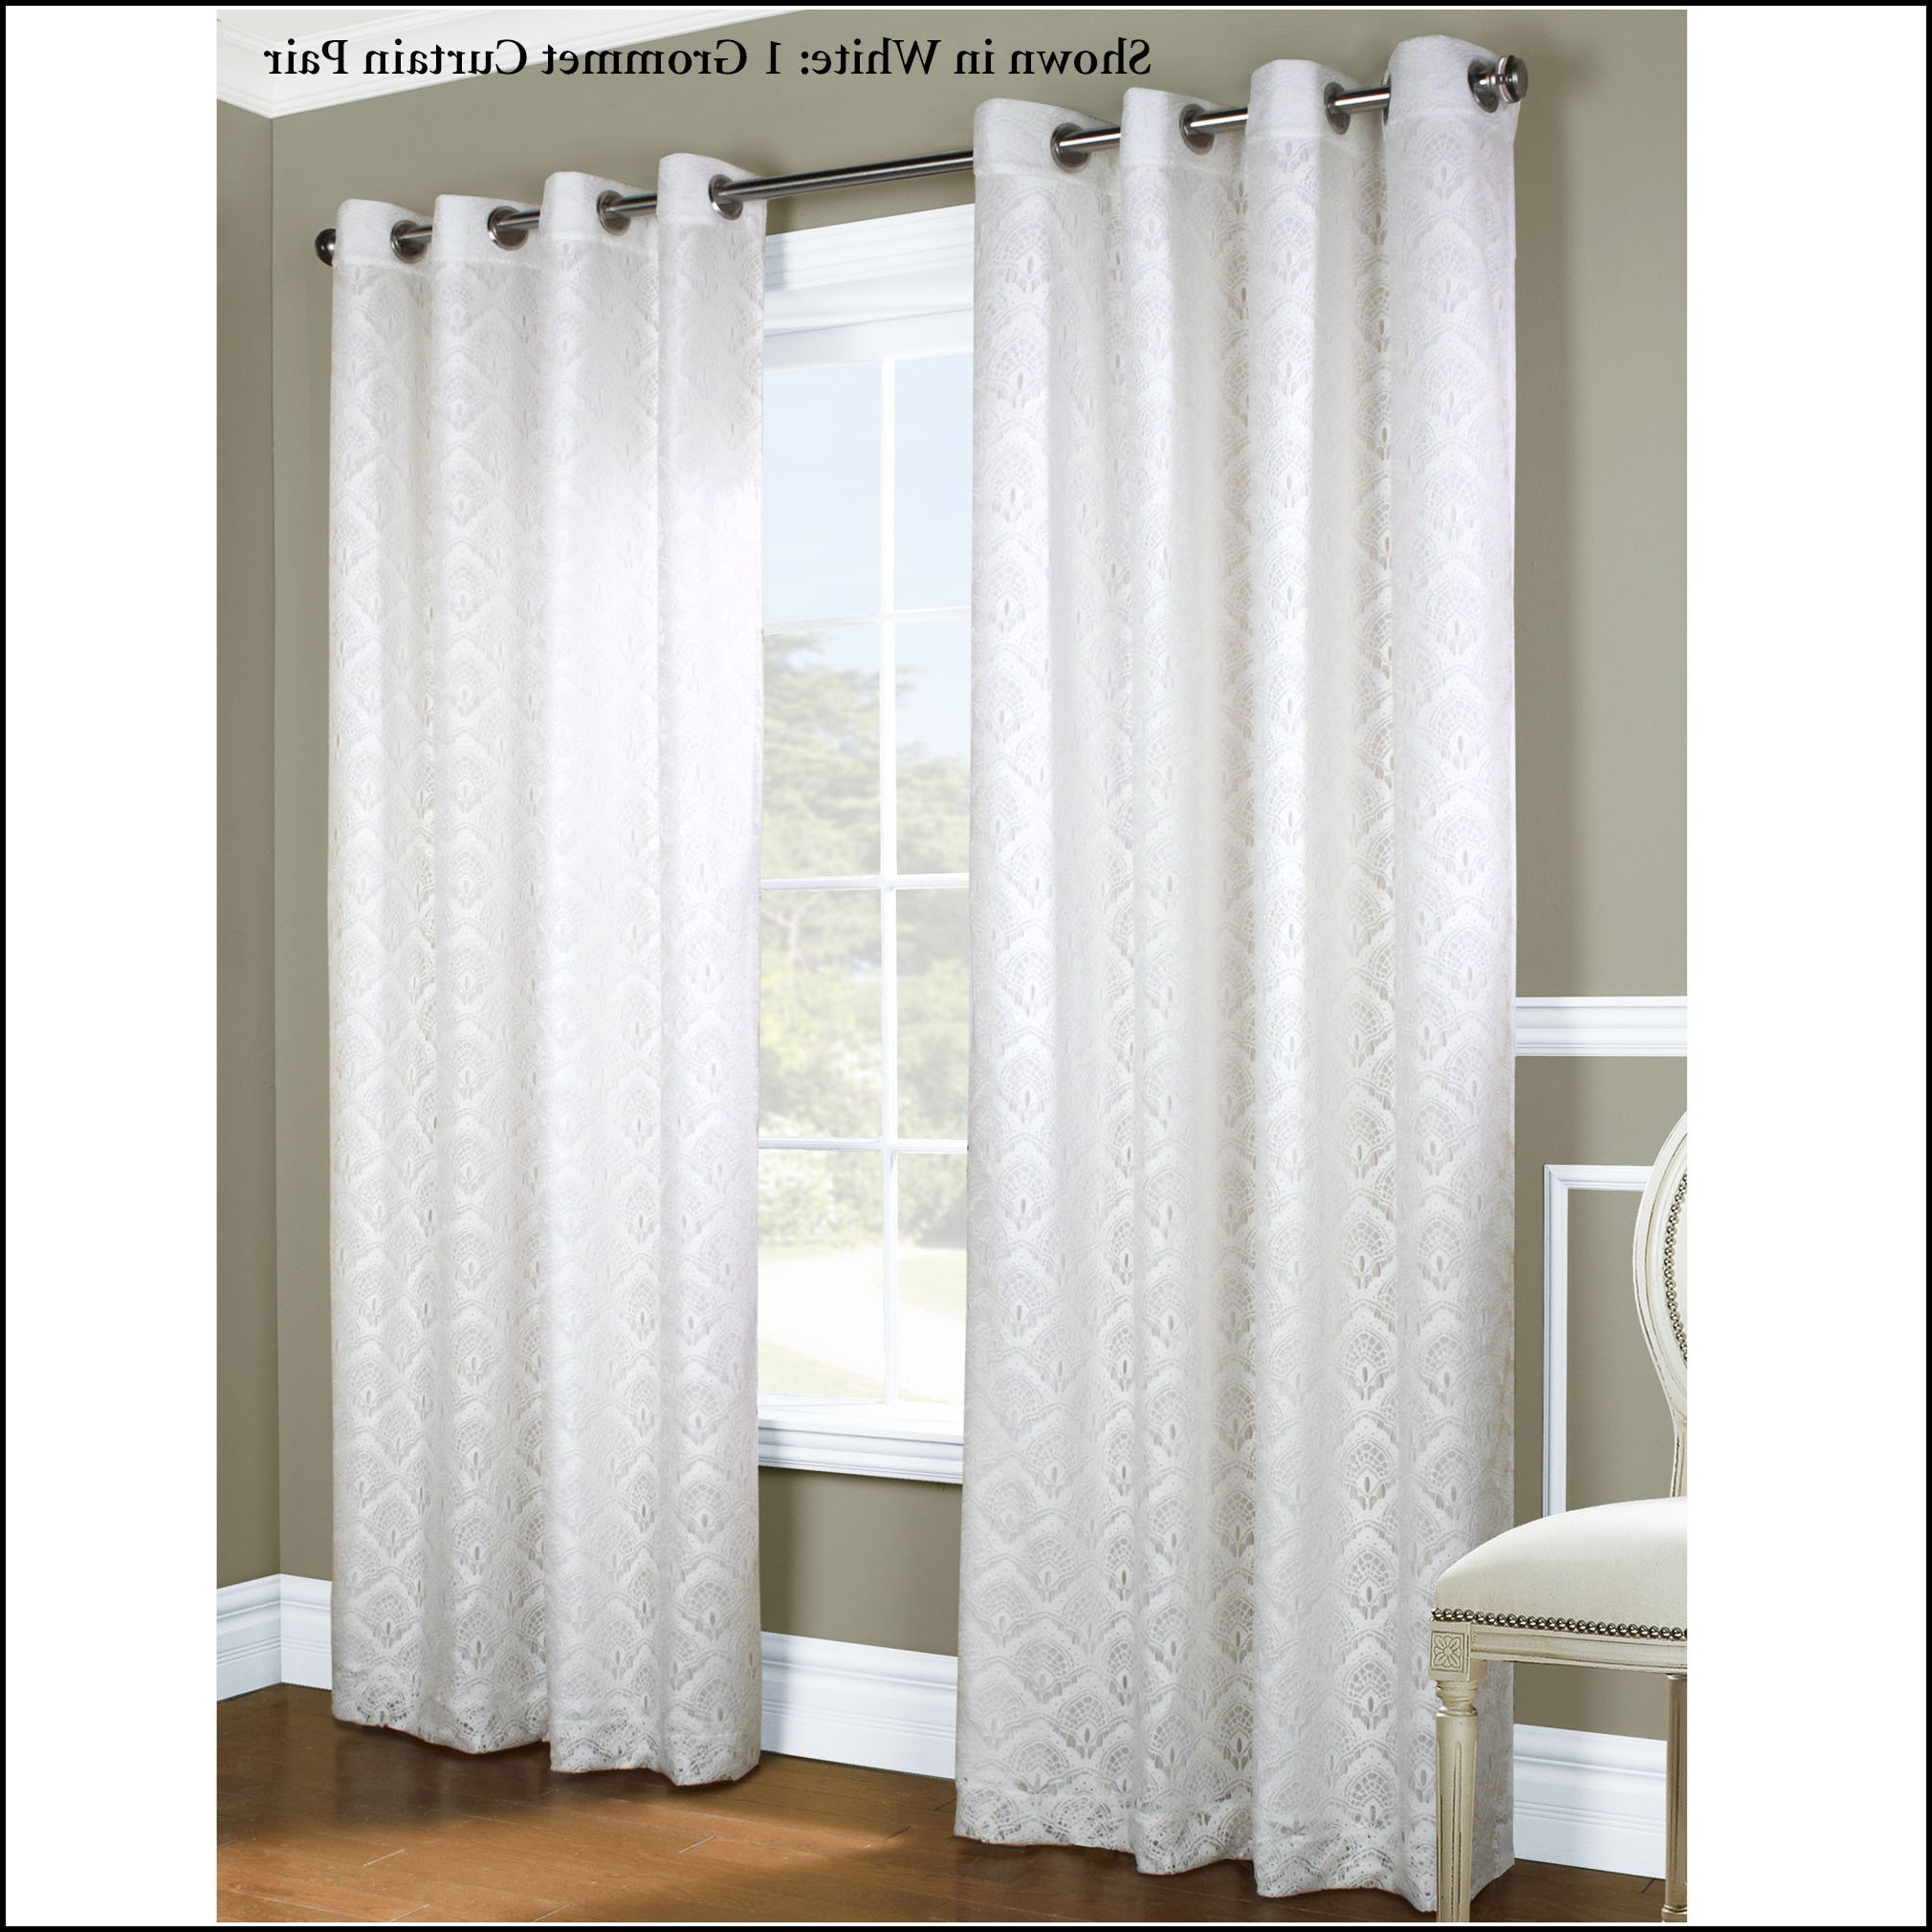 Grey Blackout Curtains Target - Curtains : Home Decorating Ideas #